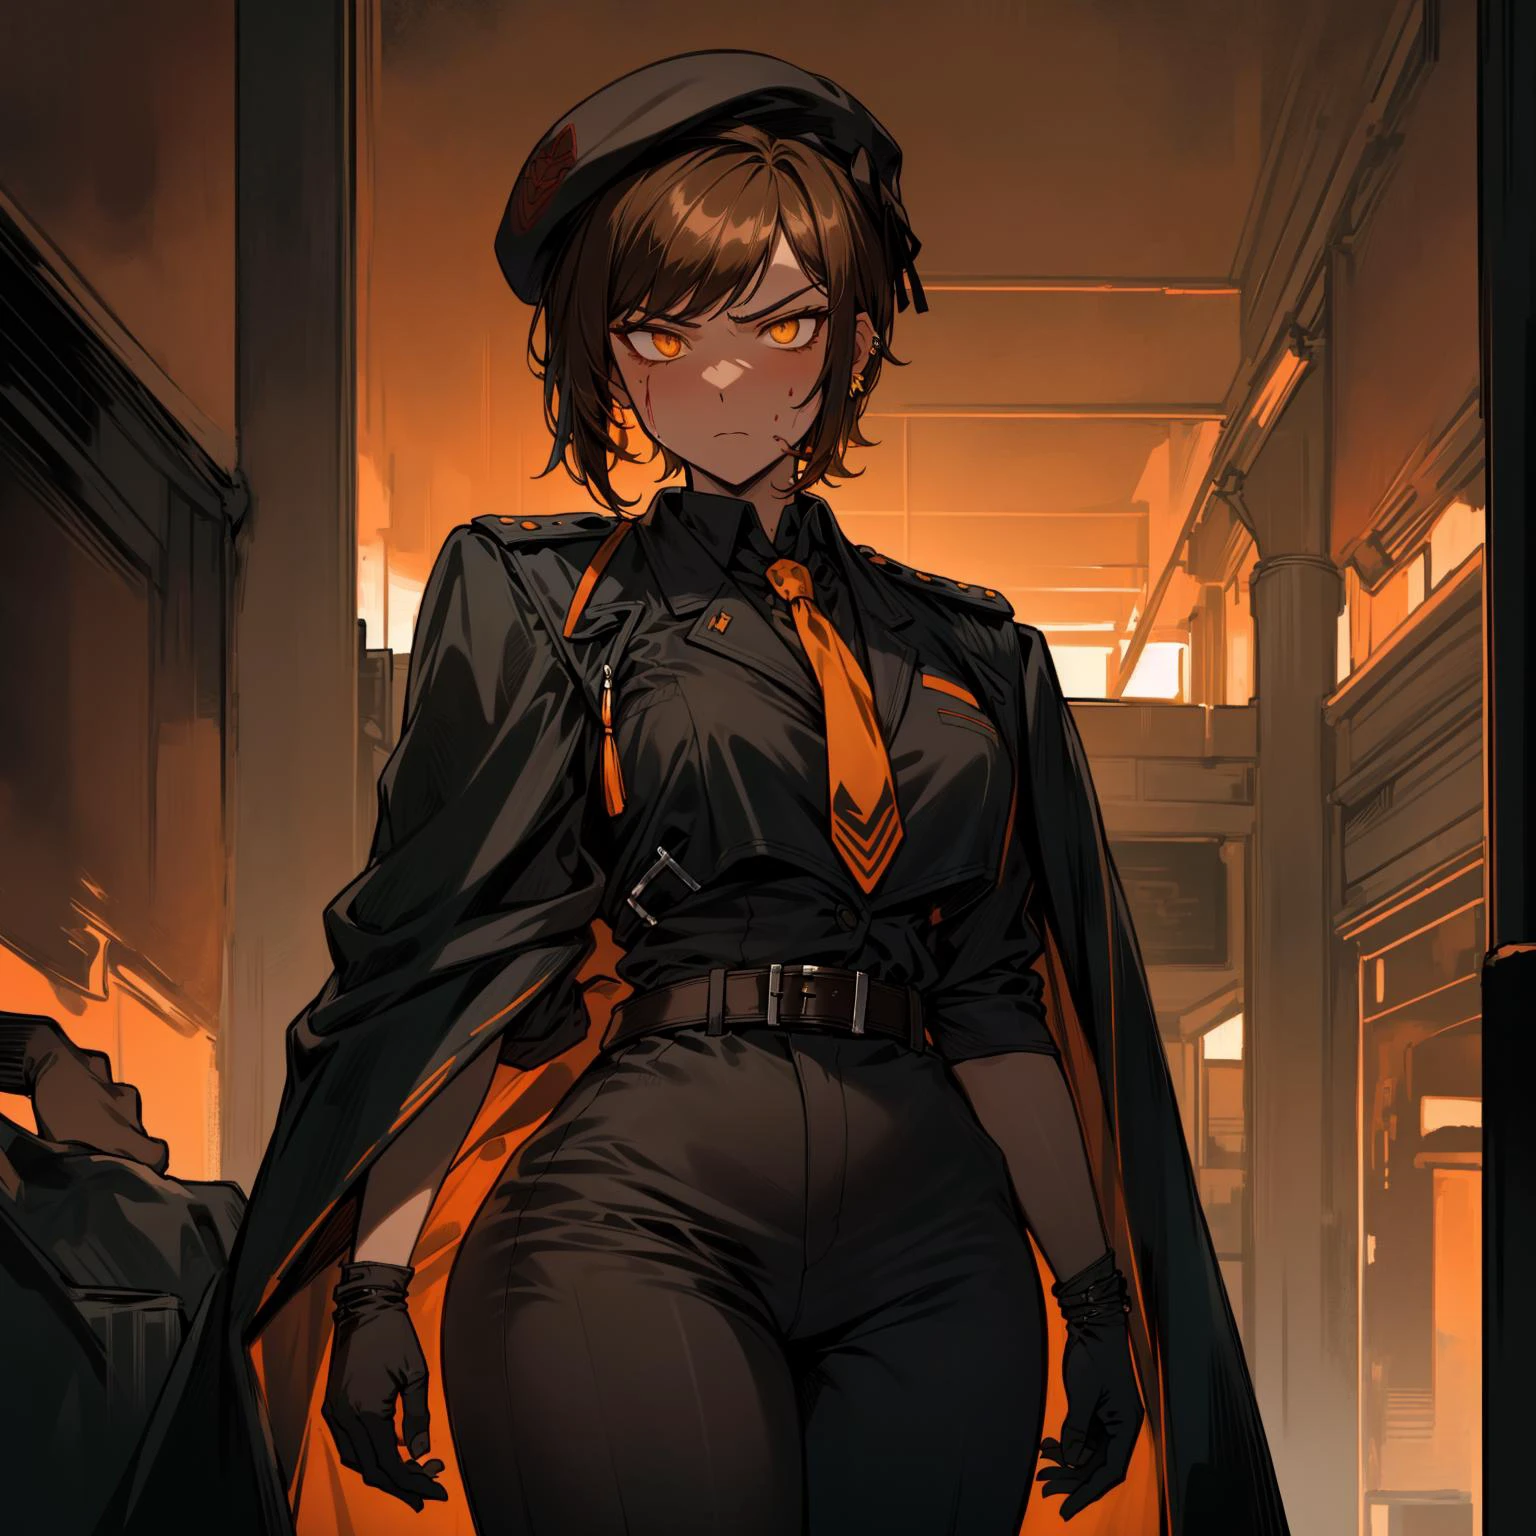 1girl, solo,  tall, (orange long cloak:0.8|black long cloak:1.4, closed orange coat:1|closed black coat:1.5,orange pants:1|black pants:1.5, orange Military beret:1|black military beret:1.5), (orange edging on clothes, gloves, red sky, standing, weapon, battlefield, blood, disformed corpses, dark and red theme, thinking, golden ear clips, {{angry,  serious, stern}}:1.3), (perfect hands, brown short hair, ((yellow eyes)))+, (white collared shirt), (outis, perfect anatomy, mature woman:1.1), jewelry,  bangs, beautiful detailed eyes,(military facility, orange necktie:1.3), medium breasts,  exquisite details,  hyper detailed,best quality,Masterpiece++, (thick body, muscular, old)+, indoors, beautiful detailed face, intricate details, anime screencap,  shiny eyes, eye reflection, perfect eyes, shiny hair, (hard light, shaded eyes), digital bending,  exquisite detailed, masterpiece, (wit studio, studio quality),  ultra detailed, (anime style:1.2),  face focus, beautiful eyes, beautiful face, best quality, cute & girly, detailed eyes, vivid colors, hyper detailed, cinematic light,   